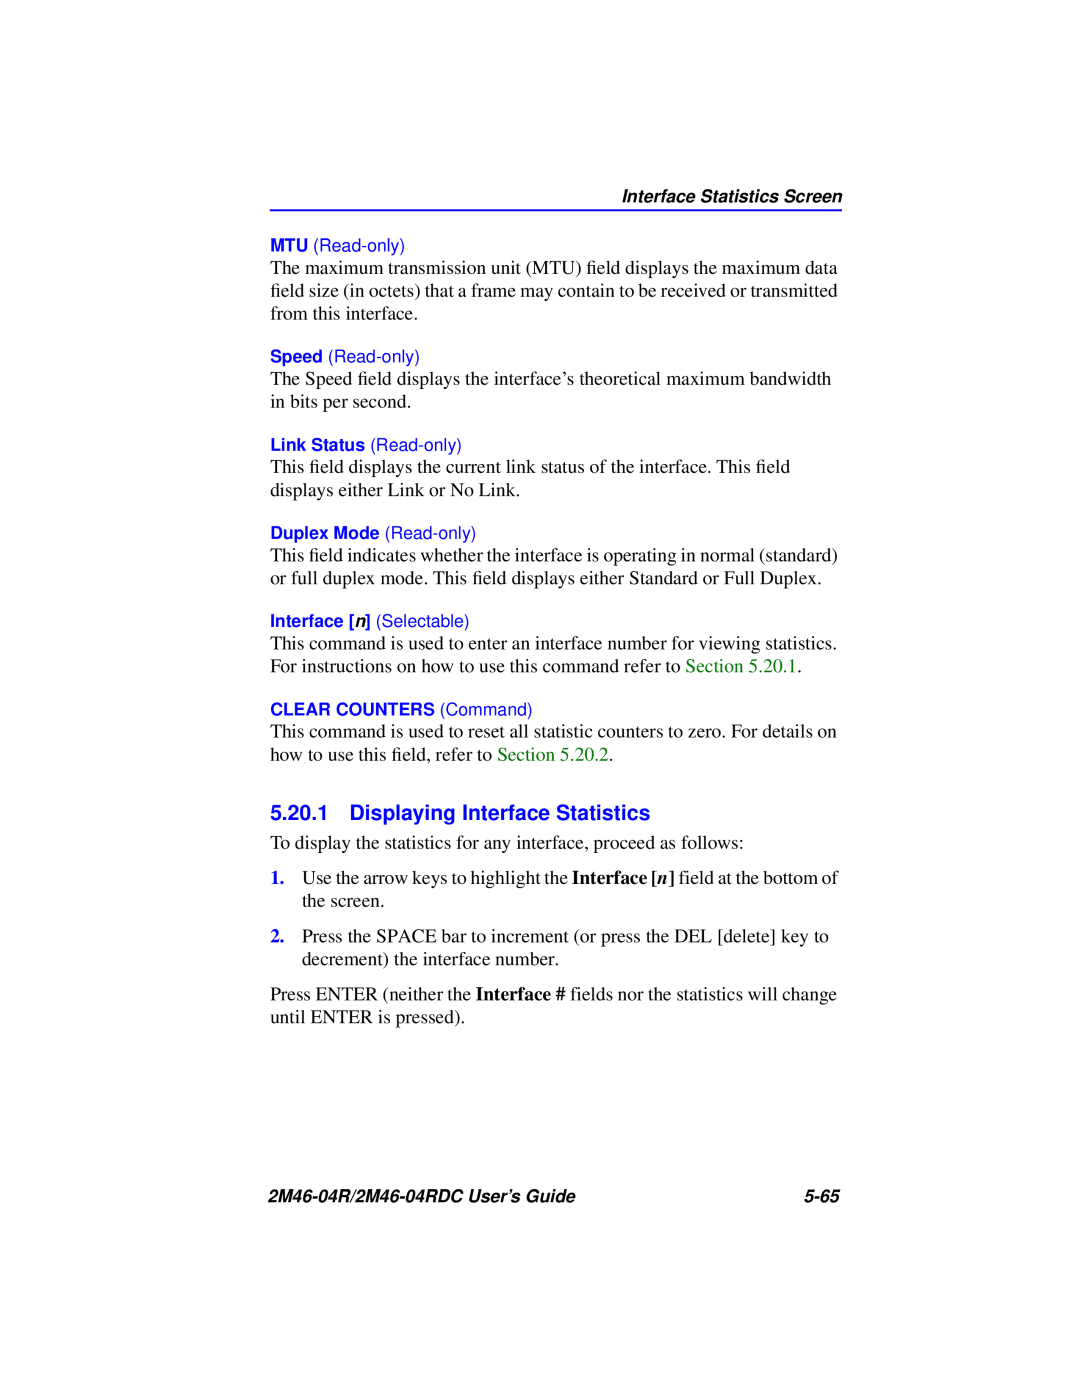 Cabletron Systems pmn manual Displaying Interface Statistics 